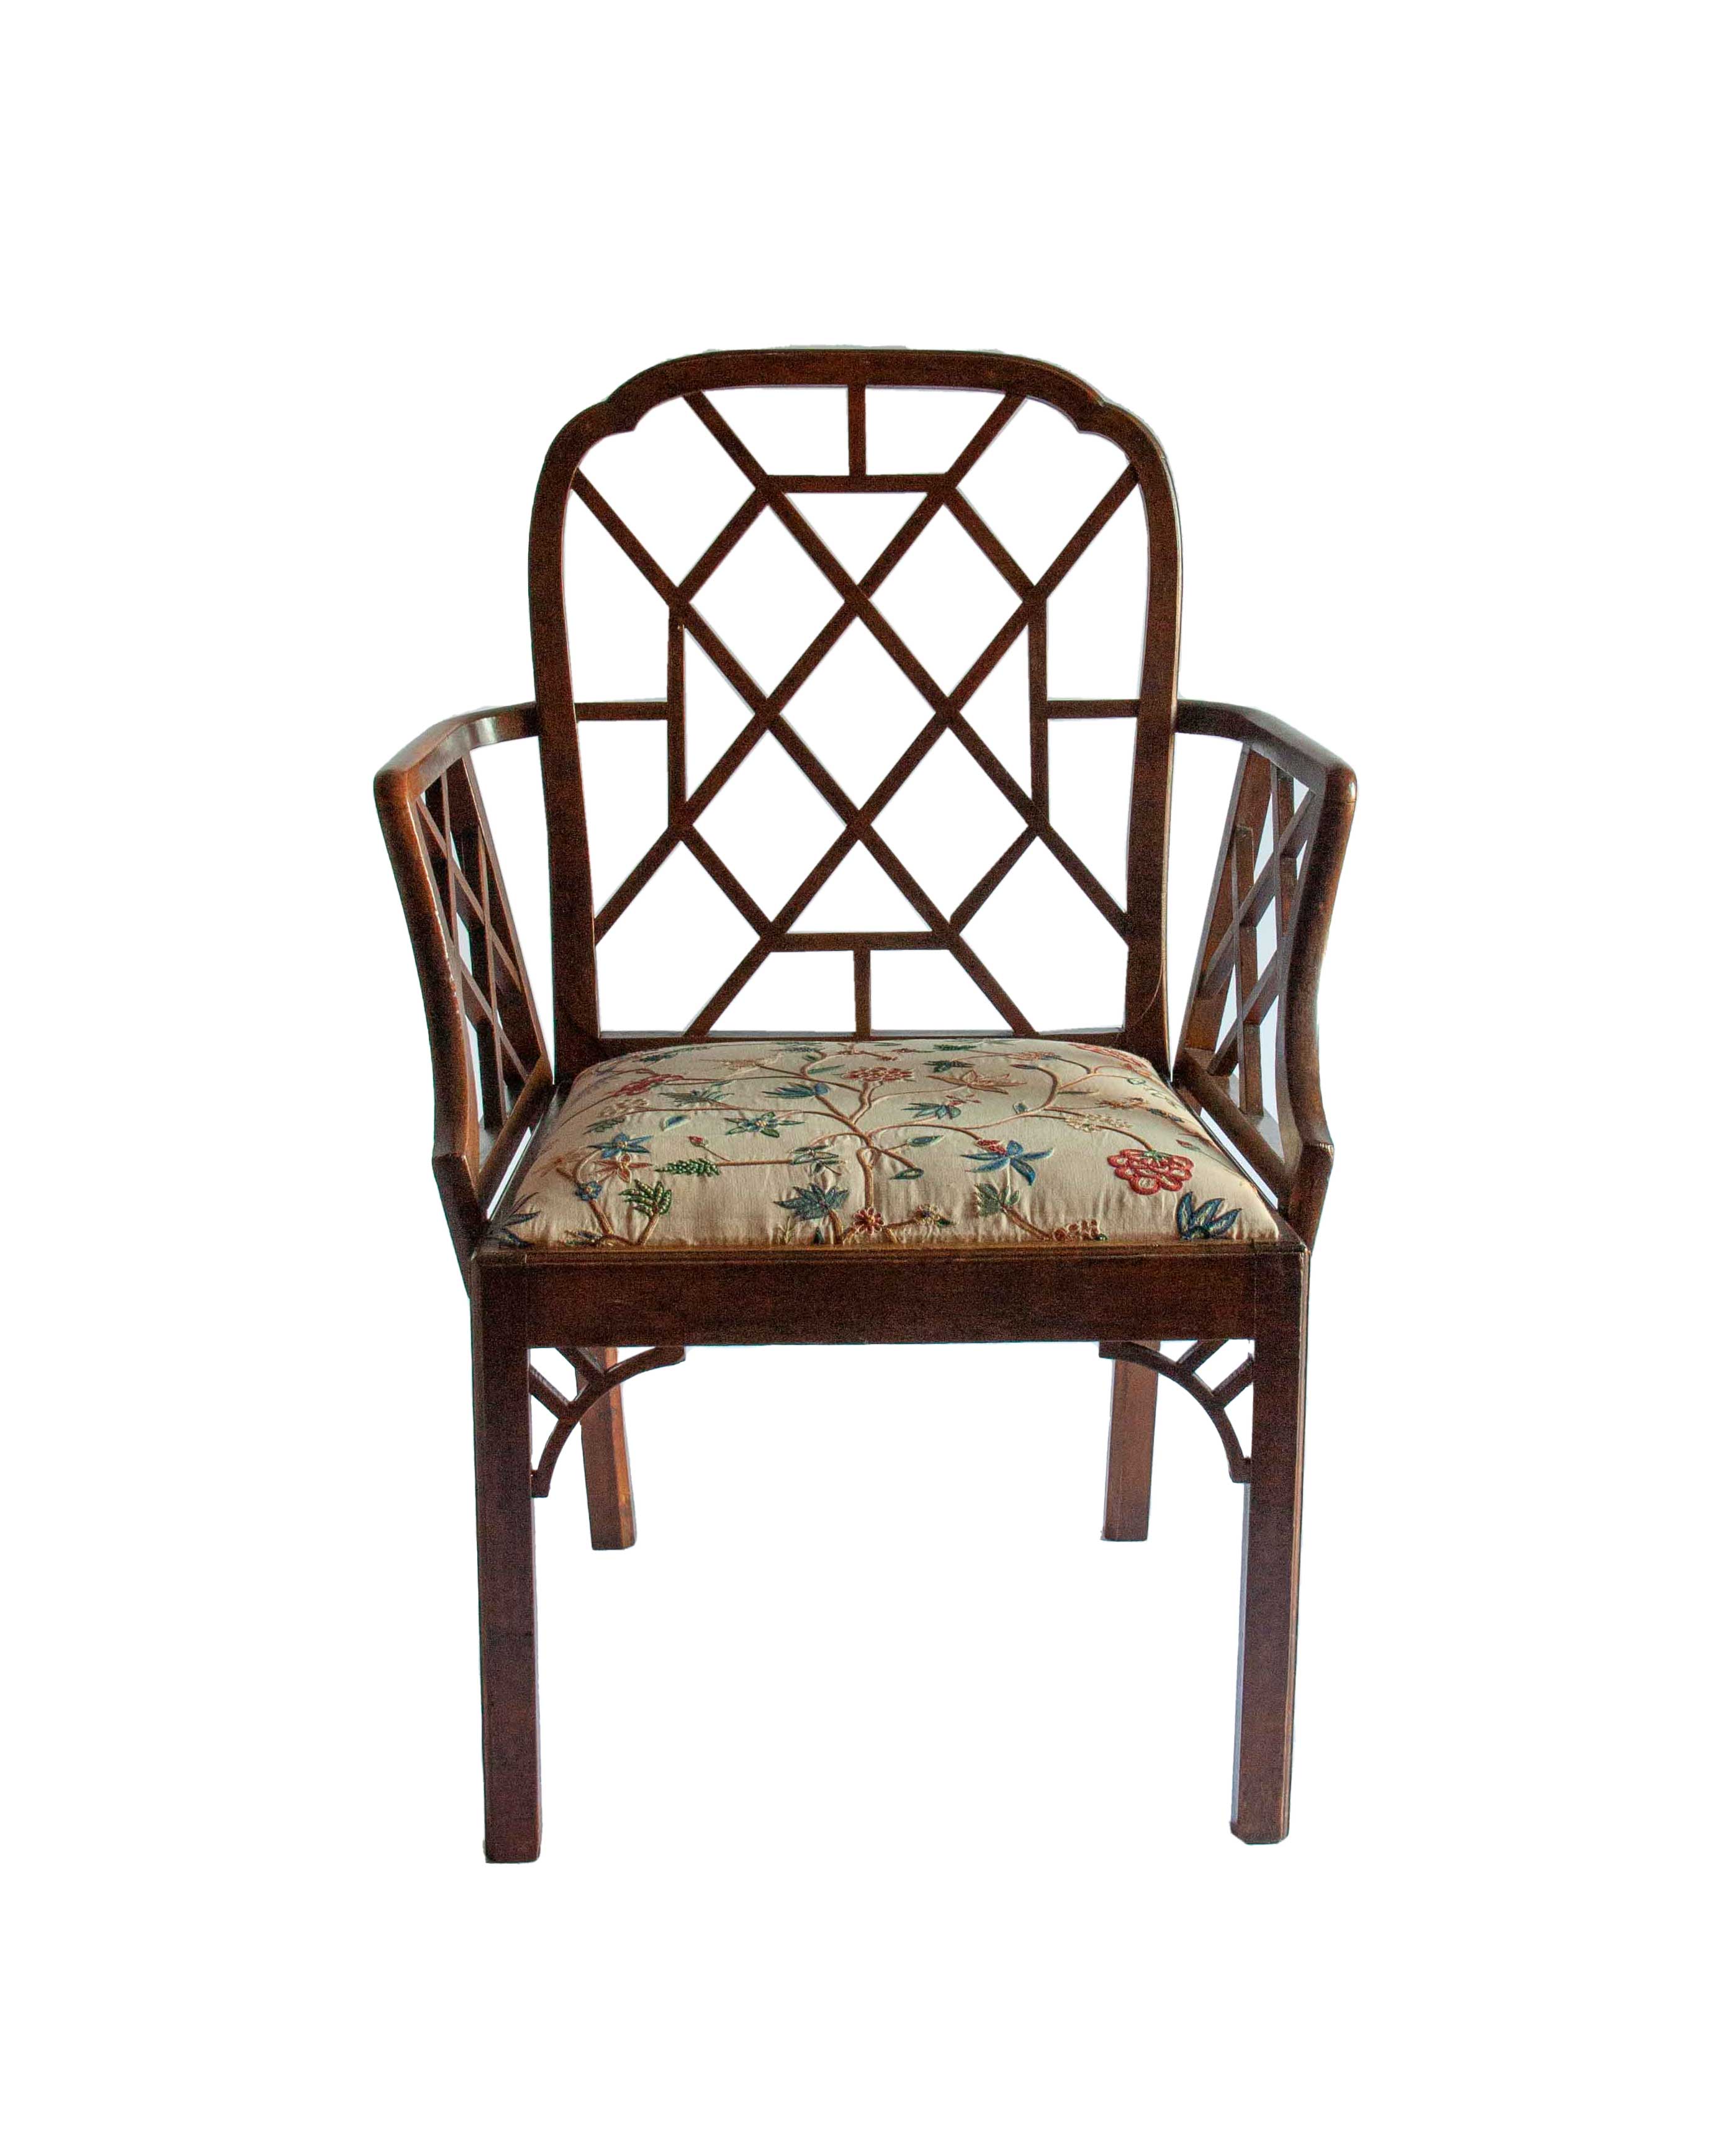 'Chinese Chippendale' Armchair